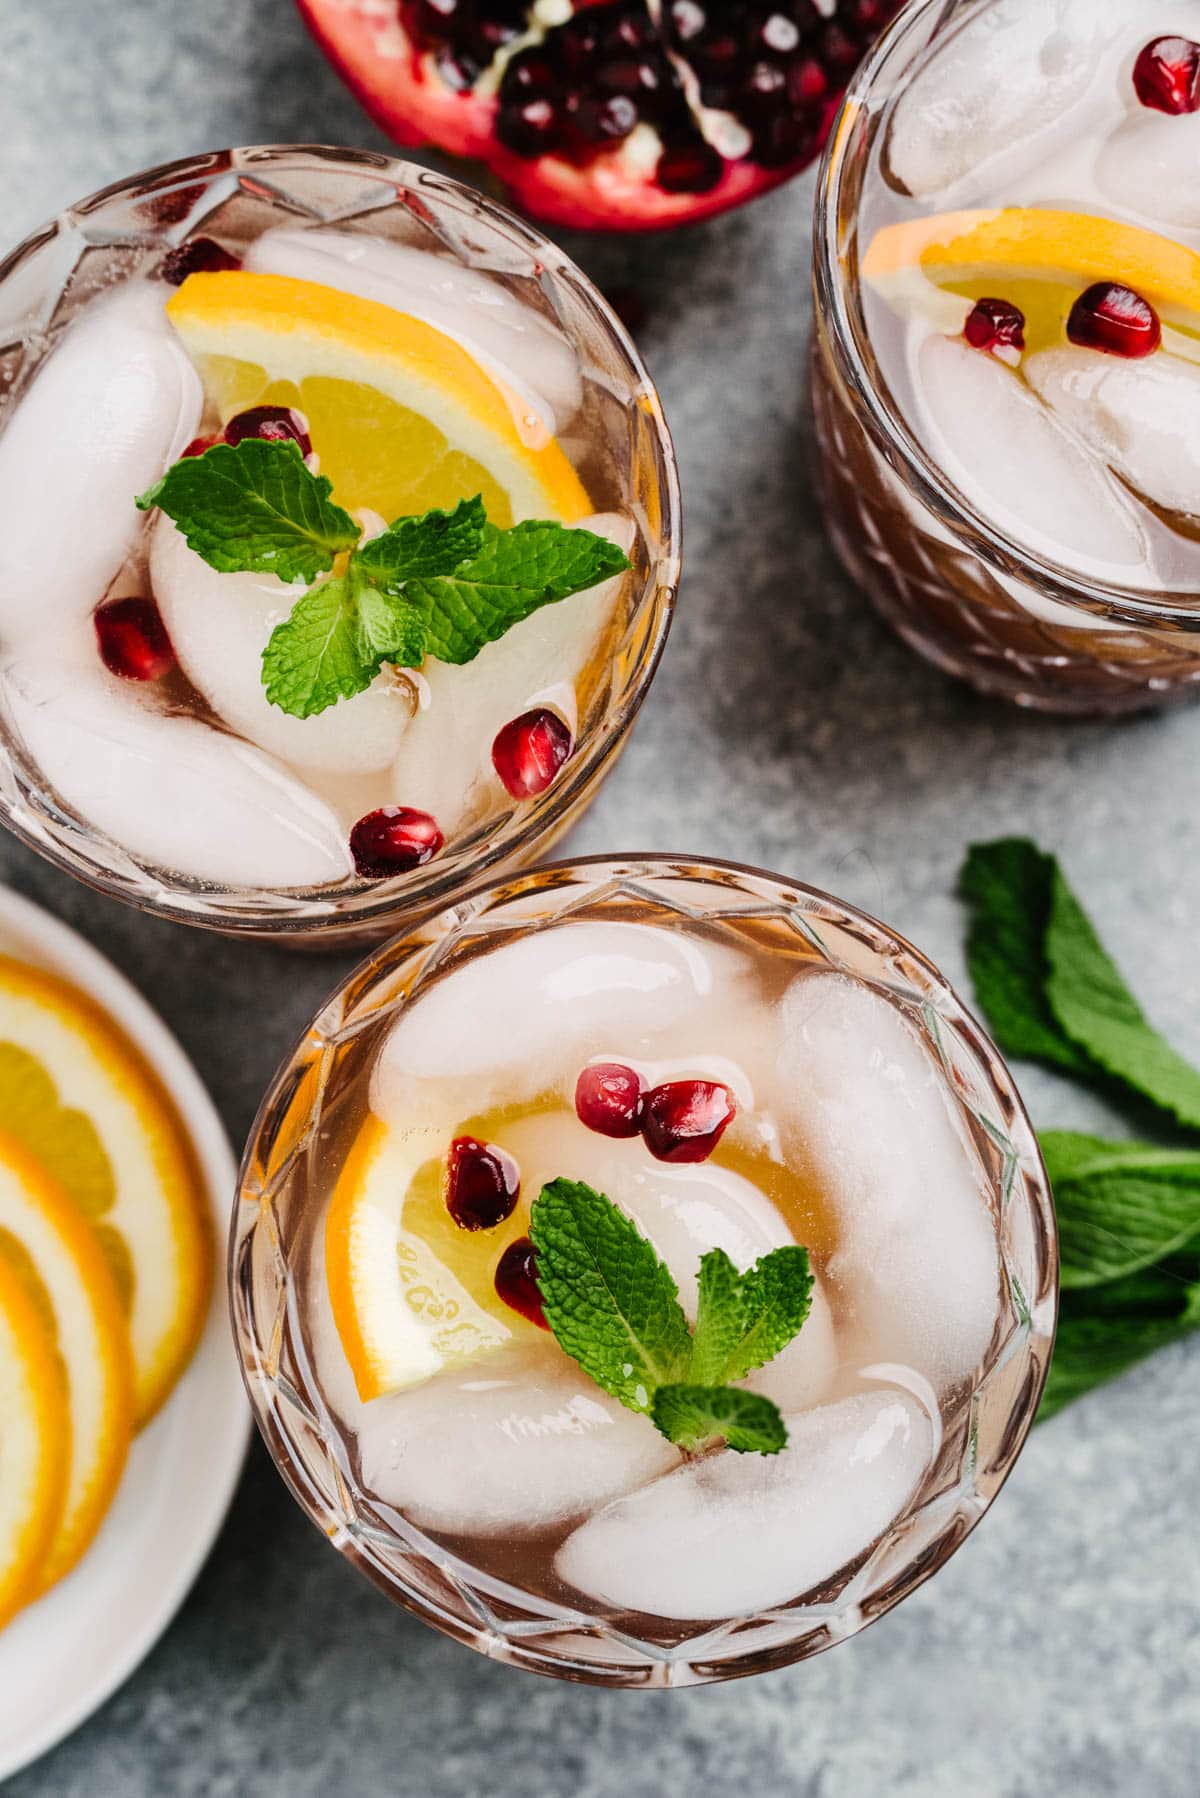 From overhead - three glasses of Prosecco punch on a concrete background, surrounded by a halved pomegranate, mint sprig, and orange slices on a white plate.